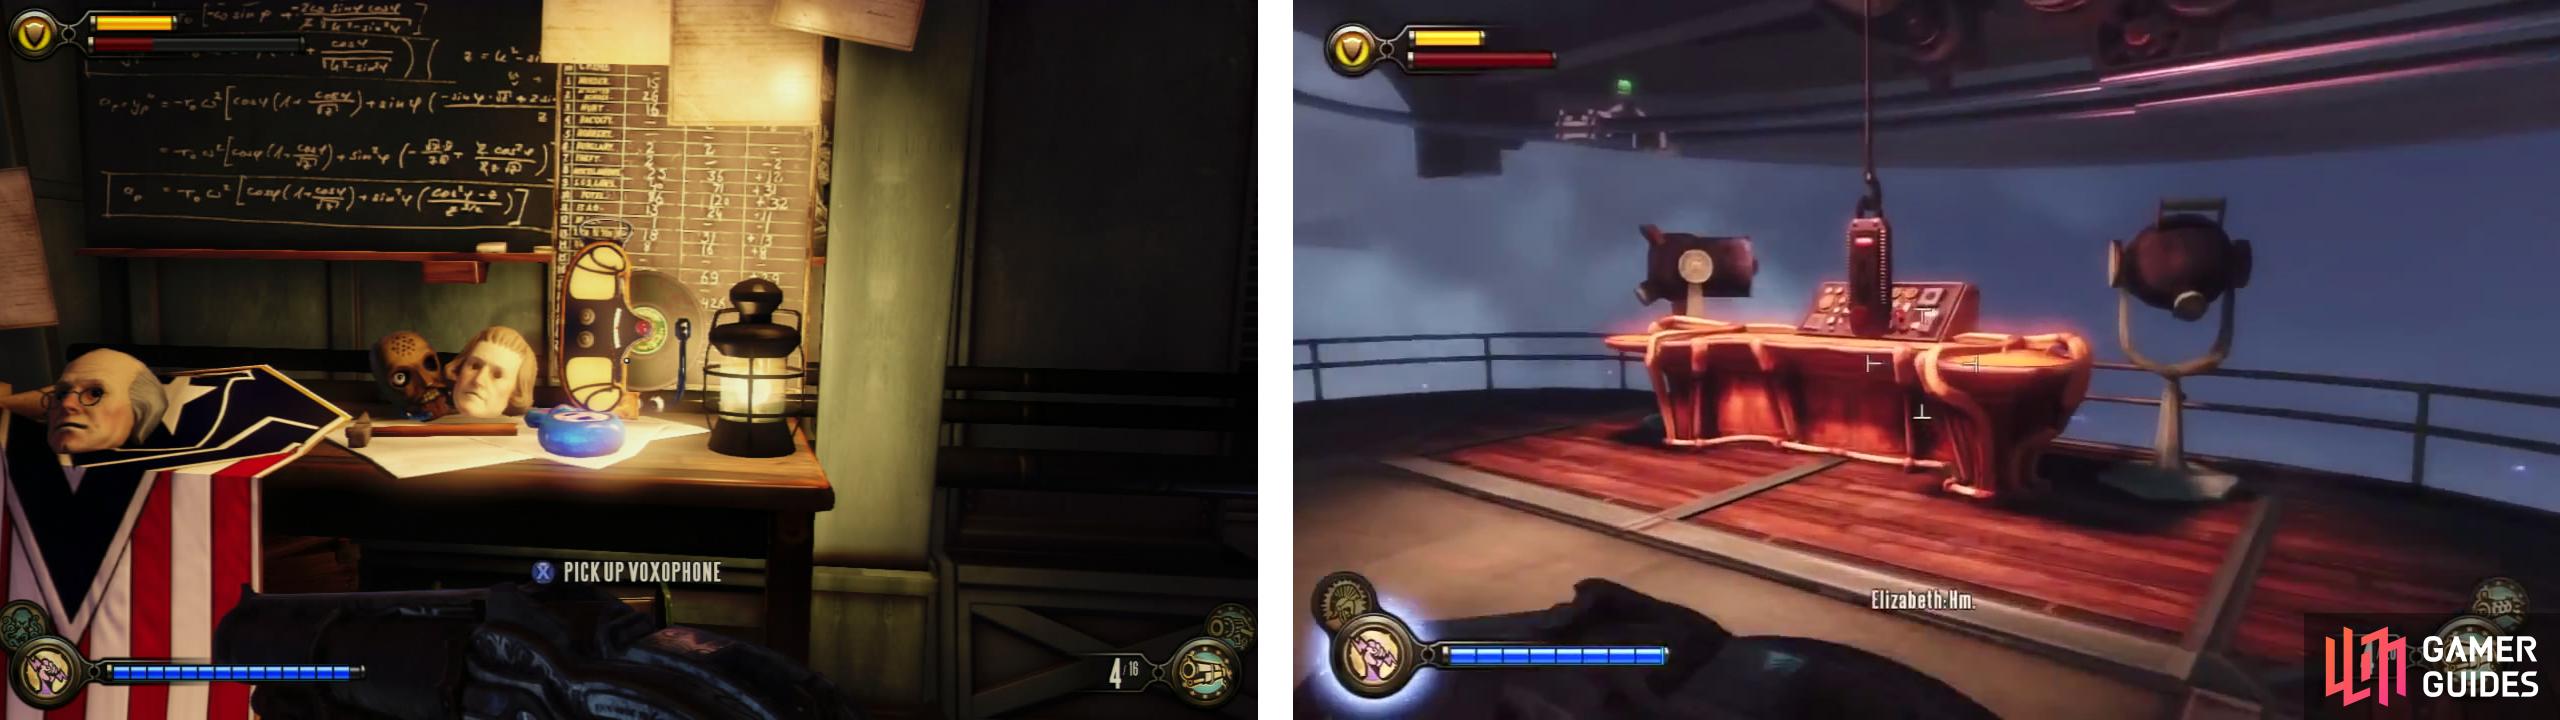 Have Elizabeth open the door to find a Voxophone inside (left). Then go hit the button to clear the skyline (right).